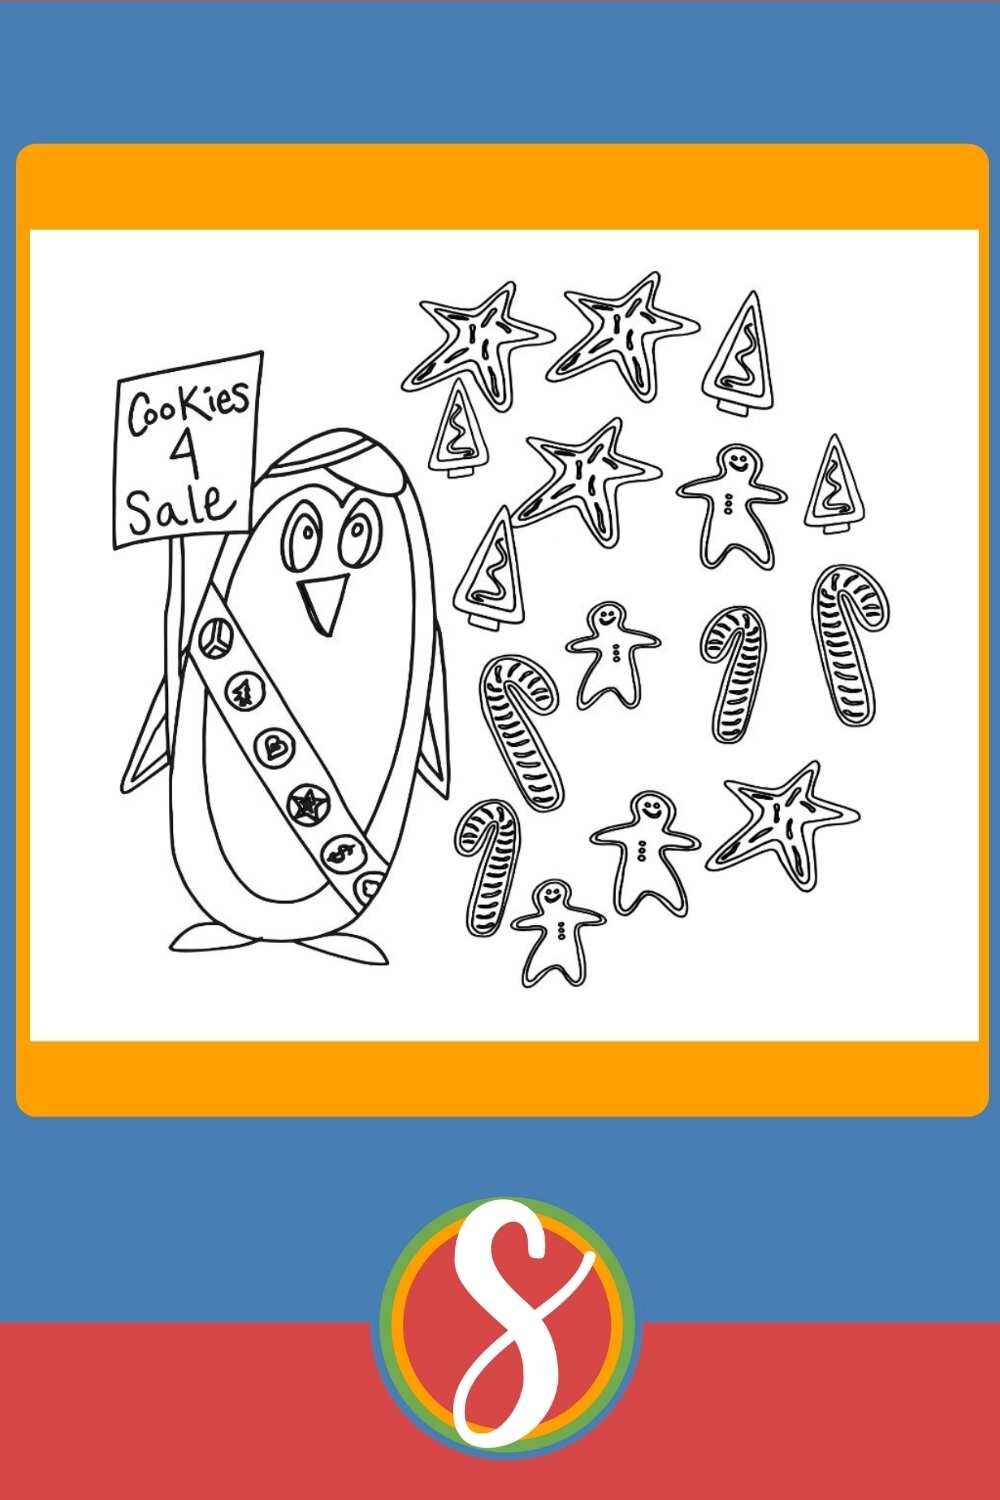 Penguin Selling Christmas Cookies - Free Penguin Coloring Page